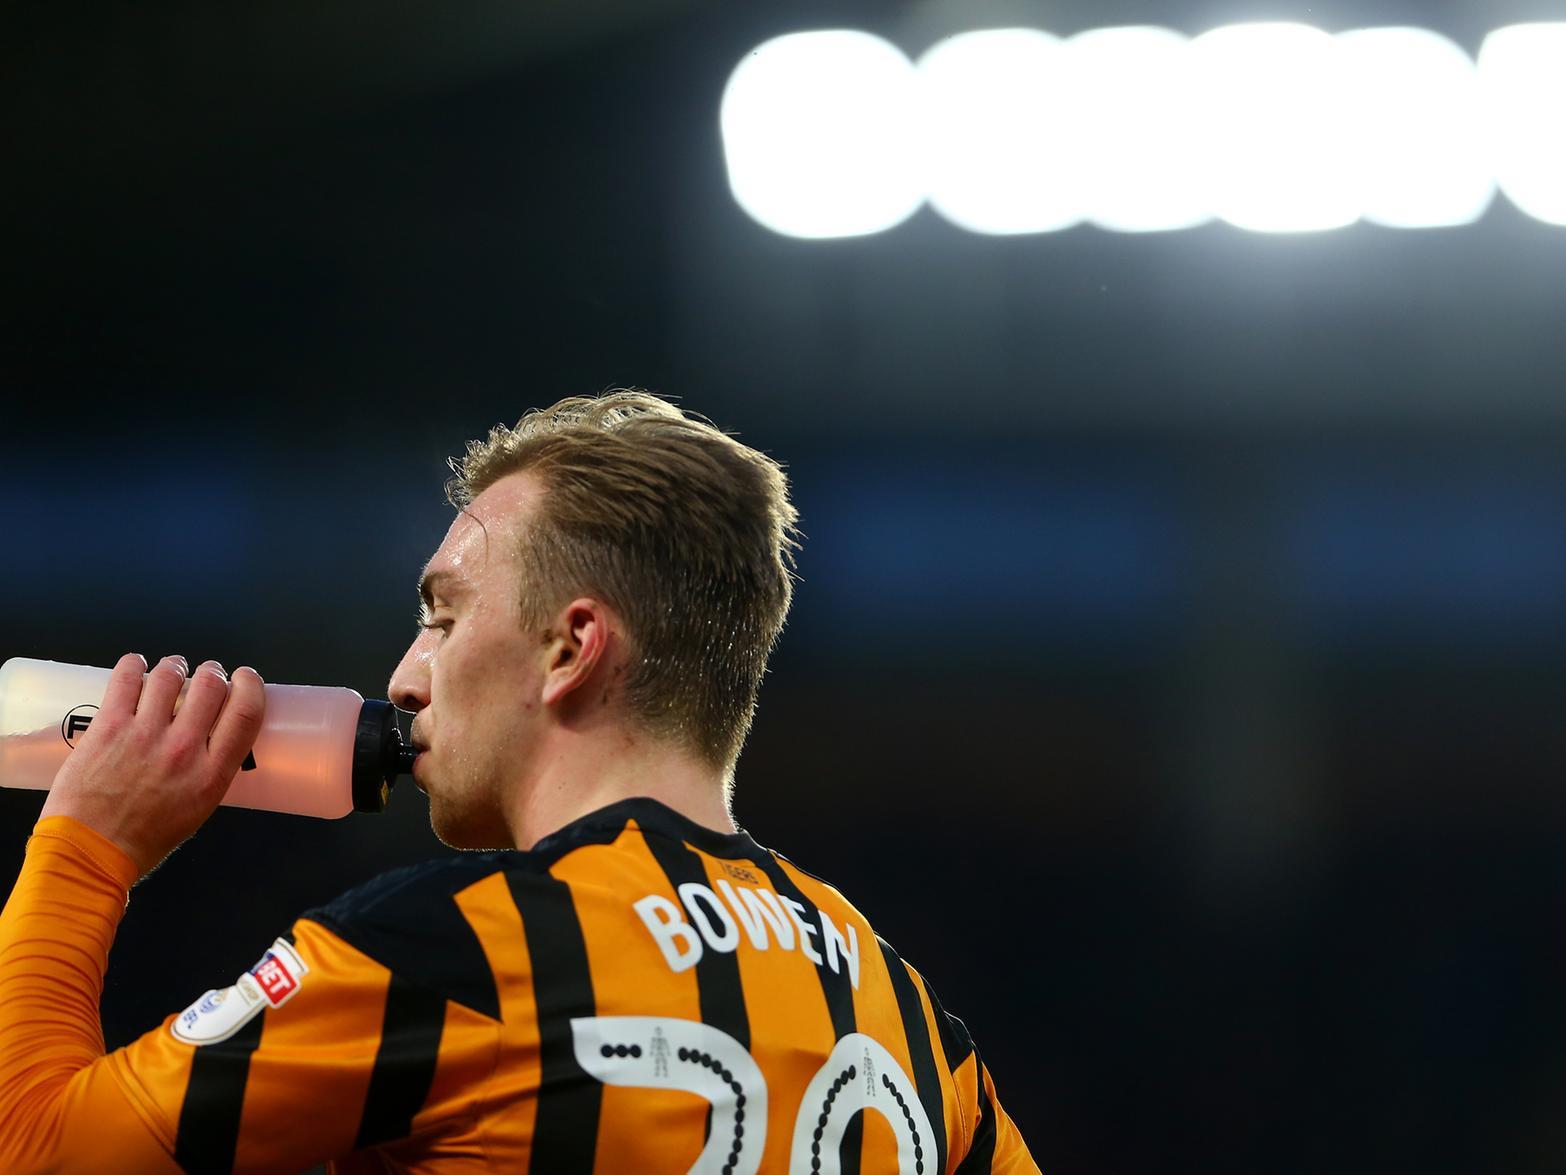 Hull City are surely resigned to losing their talismanic forward in the near future, as he put in another stellar performance for the Tigers on Wednesday, scoring twice and making an assist in a 4-0 win over Preston.